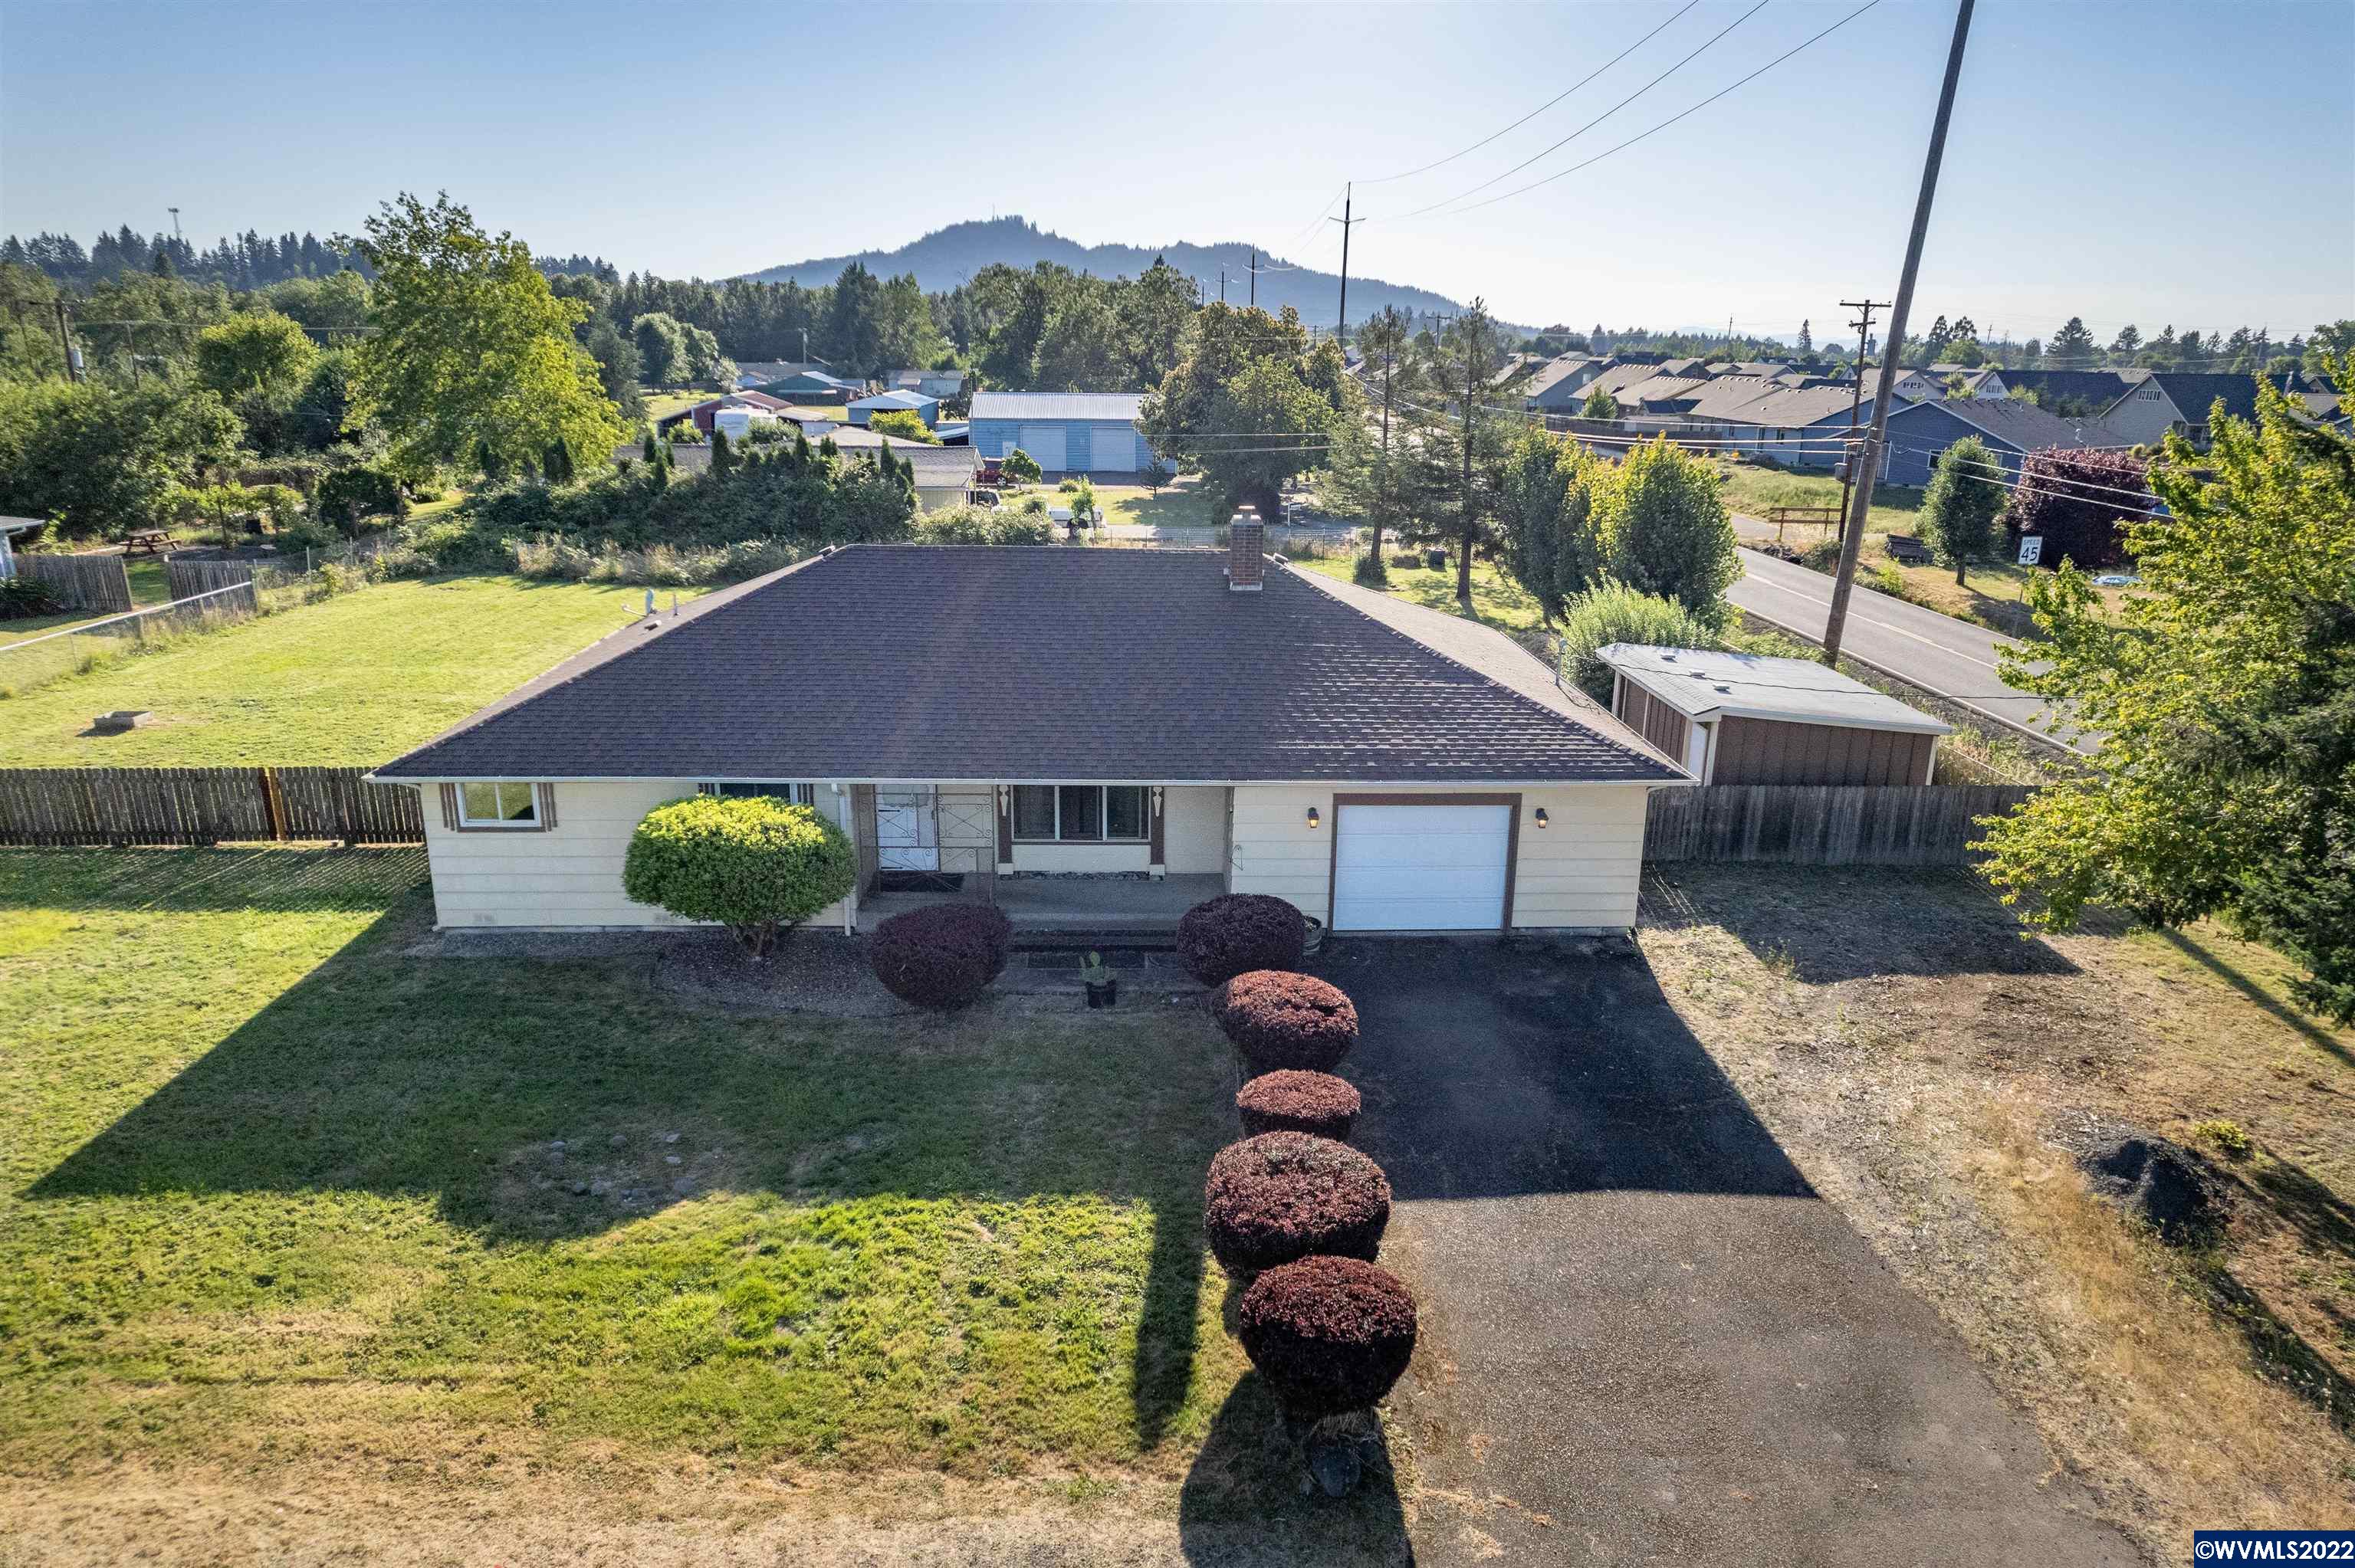 Single level spacious home located on corner lot. This 4 Bdr. 2 Bath home sits on over half an acre. Giant backyard has plenty of space for all your entertaining and outdoor-fun. Country feel but close to shopping and schools. Ready for new owners to make it their own.